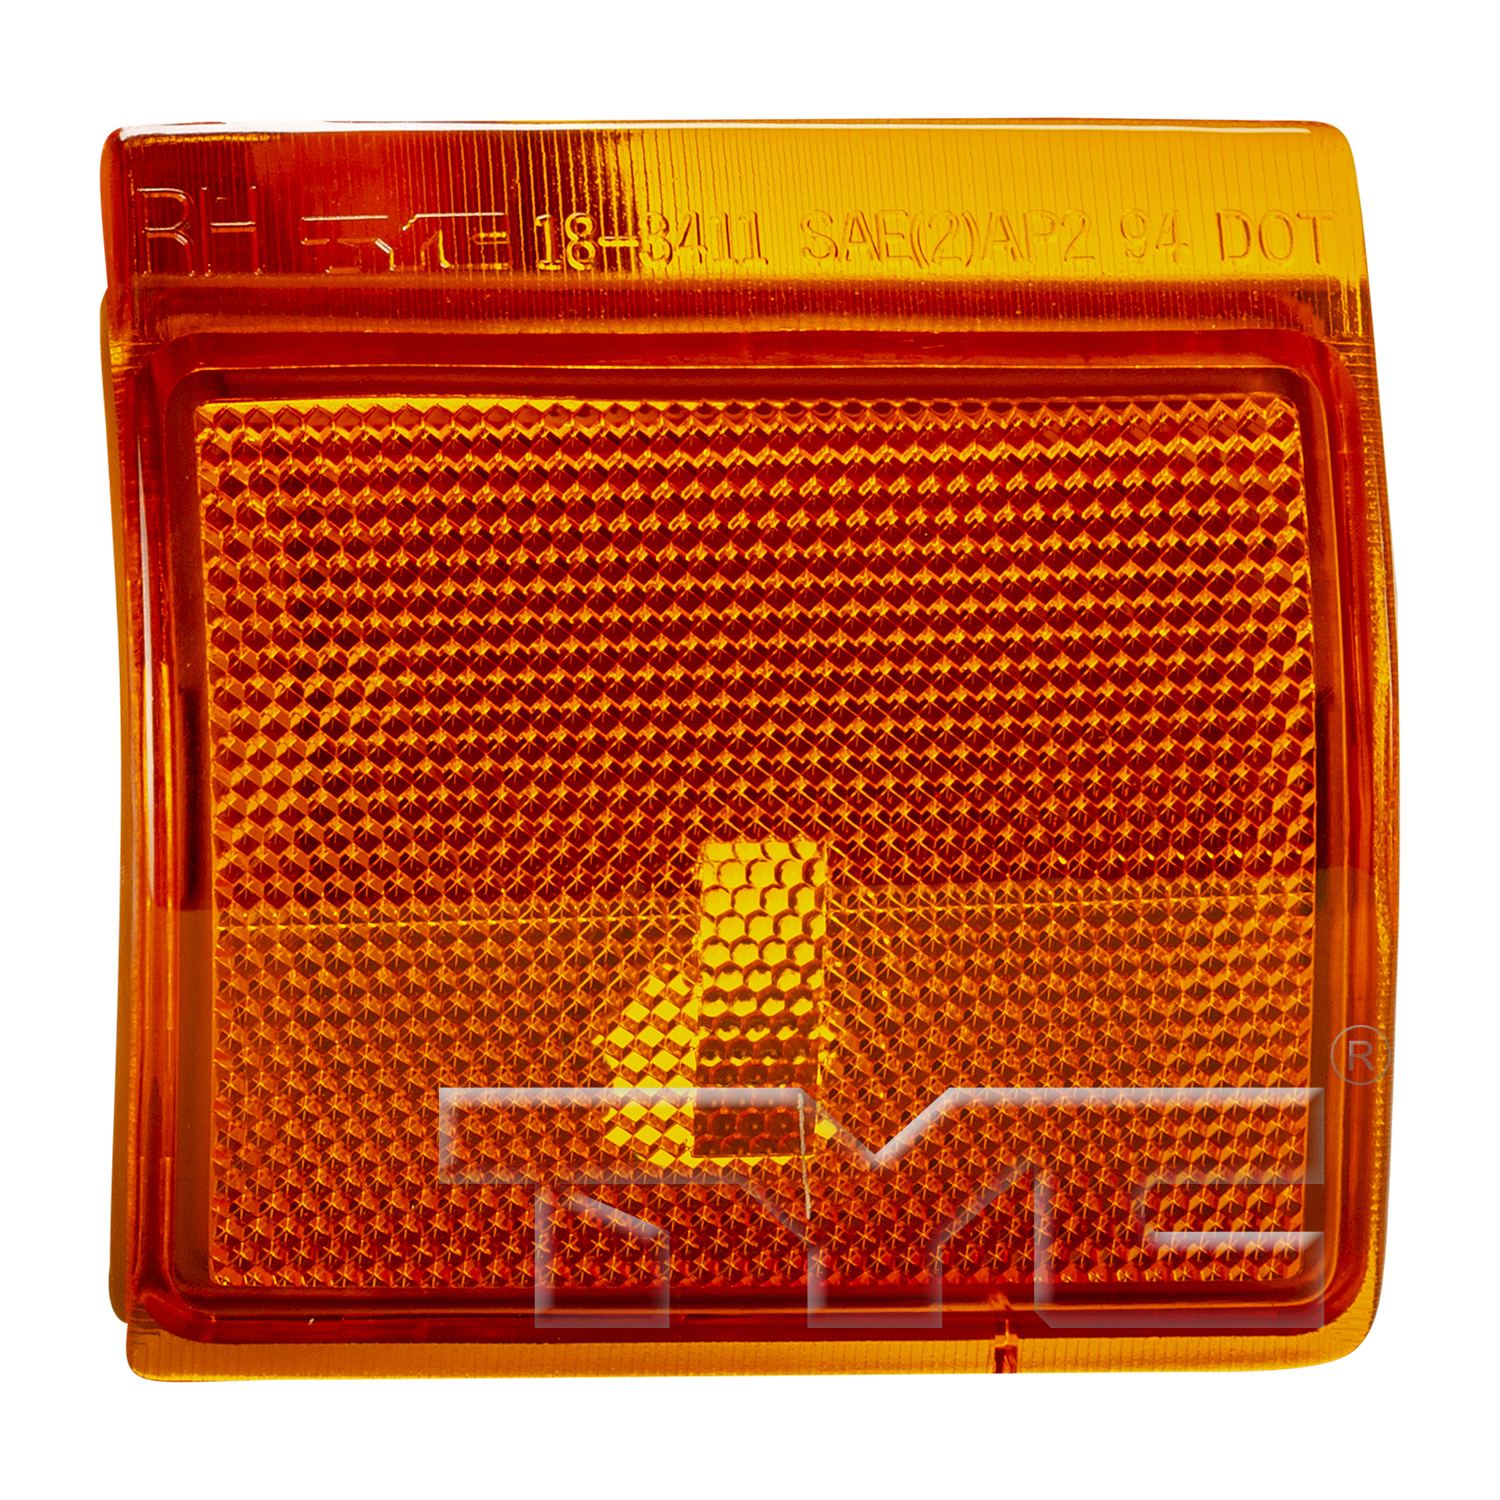 Aftermarket LAMPS for GMC - C1500 SUBURBAN, C1500 SUBURBAN,94-99,RT Front marker lamp assy